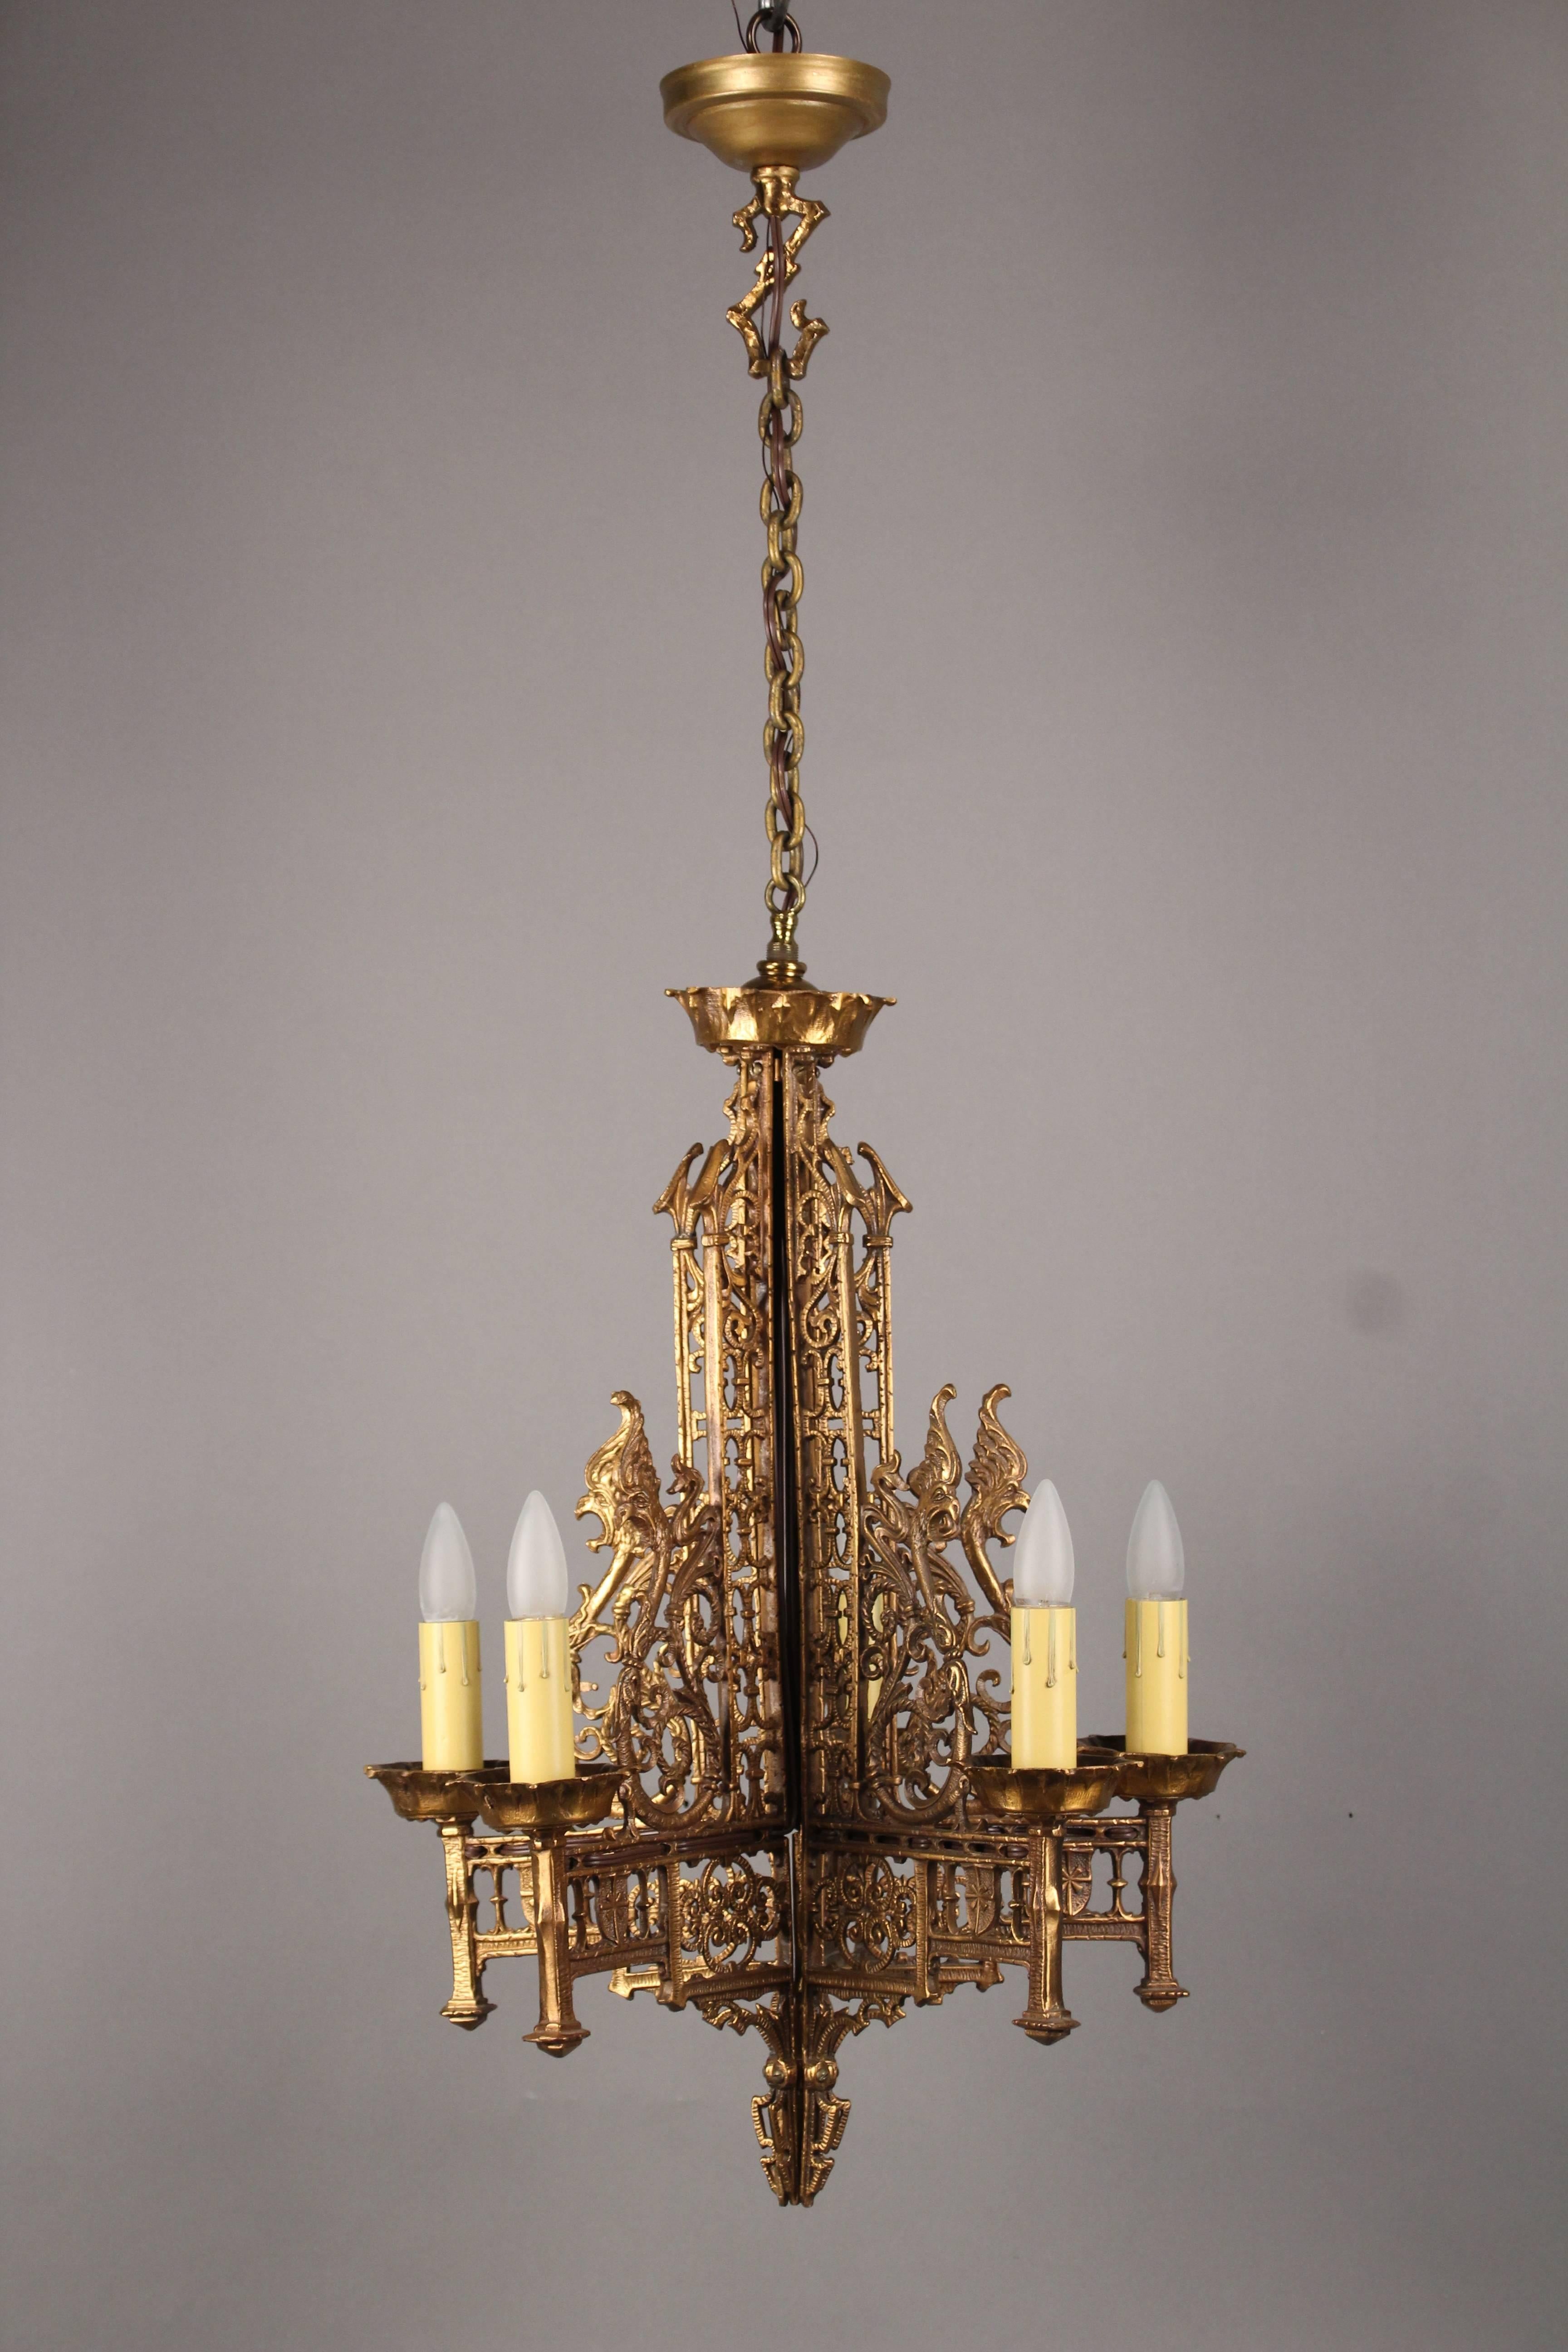 Five-light 1920s chandelier with great casting of mythical creatures. A wonderful piece for an English Tudor or Gothic style home 28.5